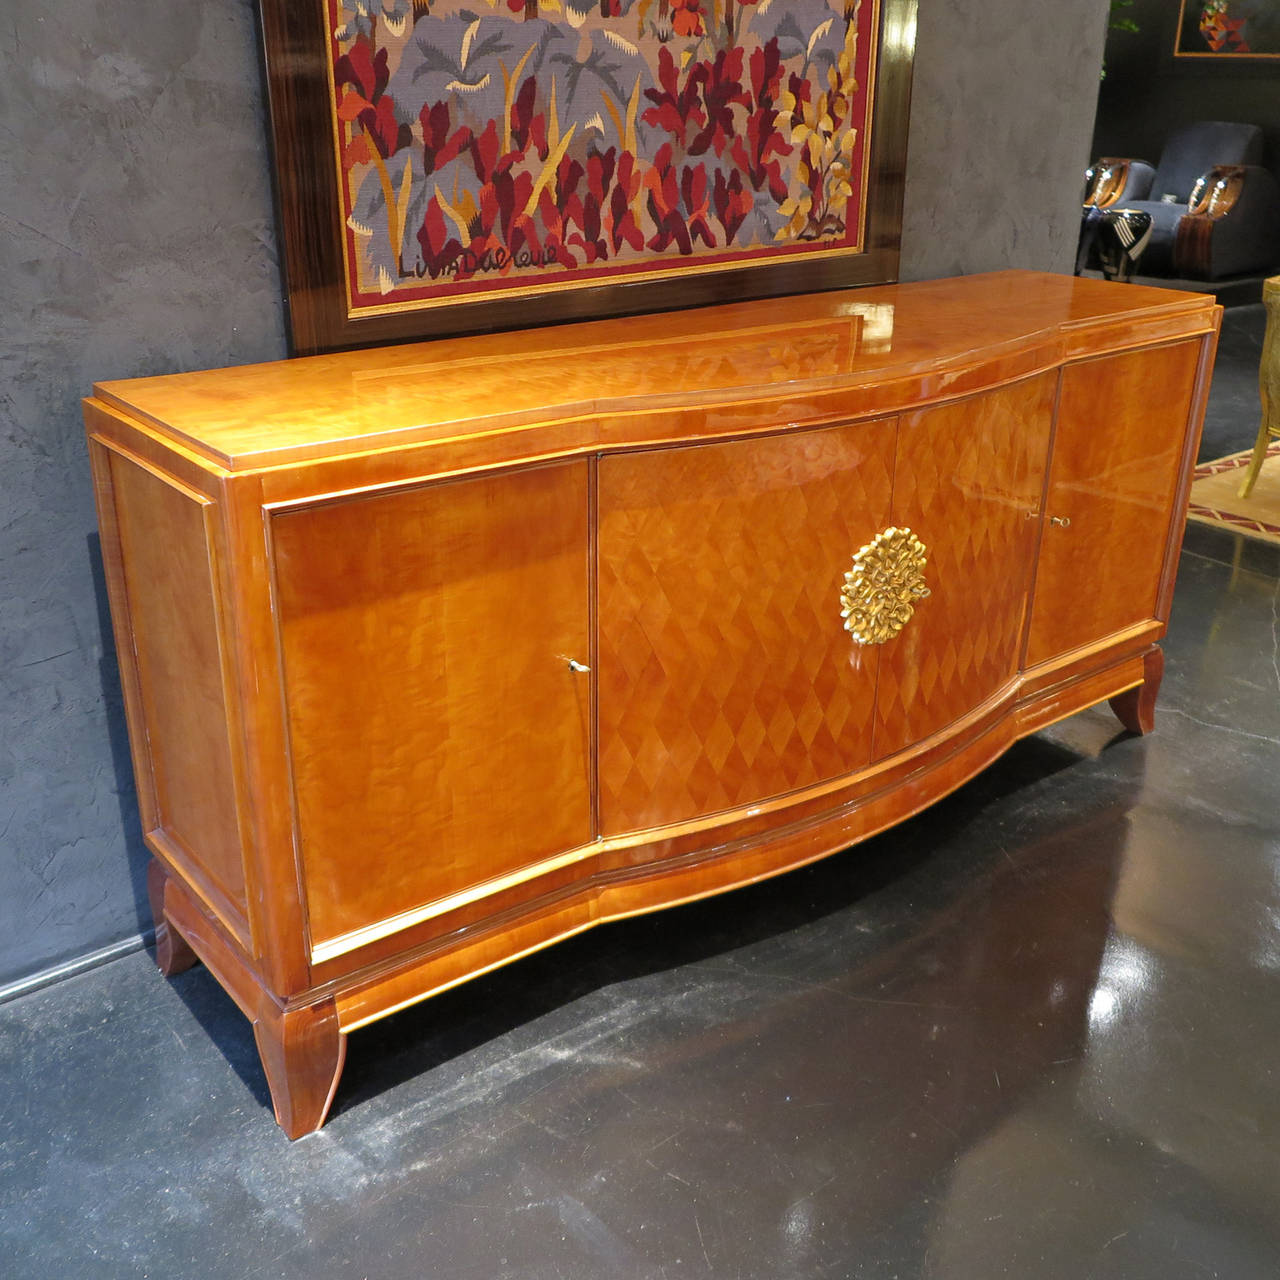 Beautiful sideboard by Jules Leleu and Paul Henri Goulet. Piece done in sycamore with diamond marquetry details on front doors. Center doors decorated in stylized leaf carving on facade in gold leaf. Side doors open to drawer and shelf. Center doors